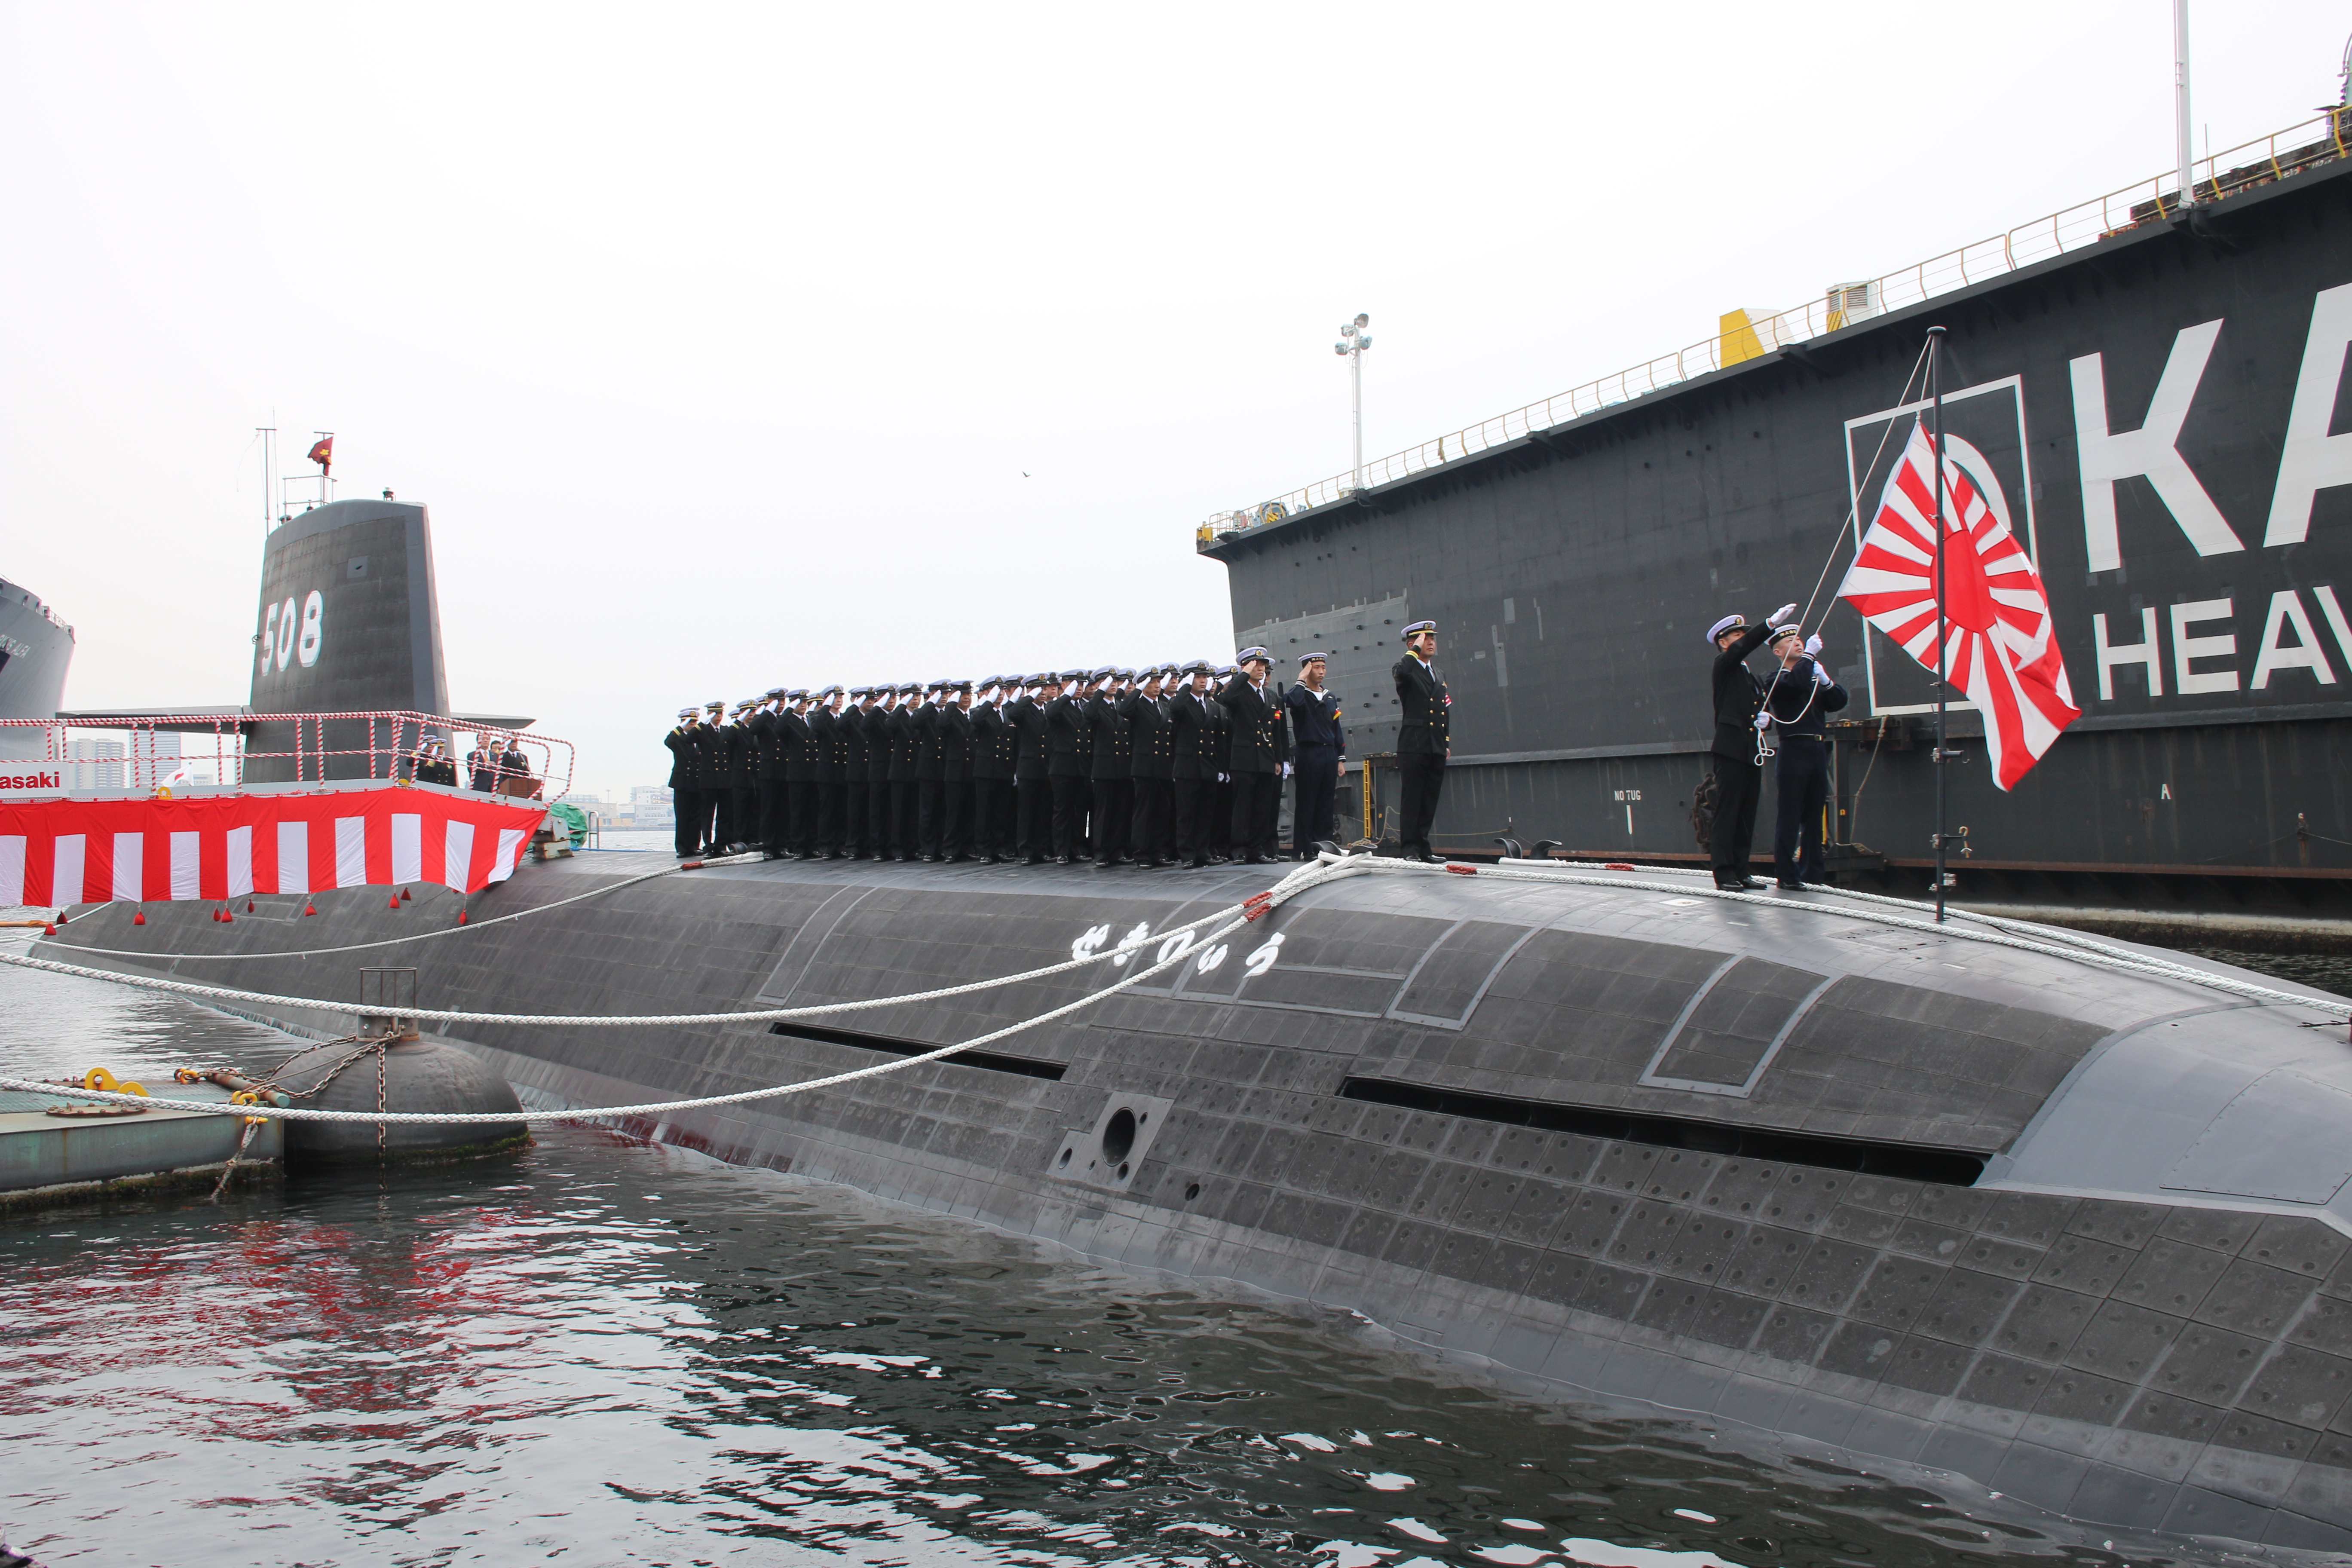 Japan Commissions New Attack Submarine – The Diplomat